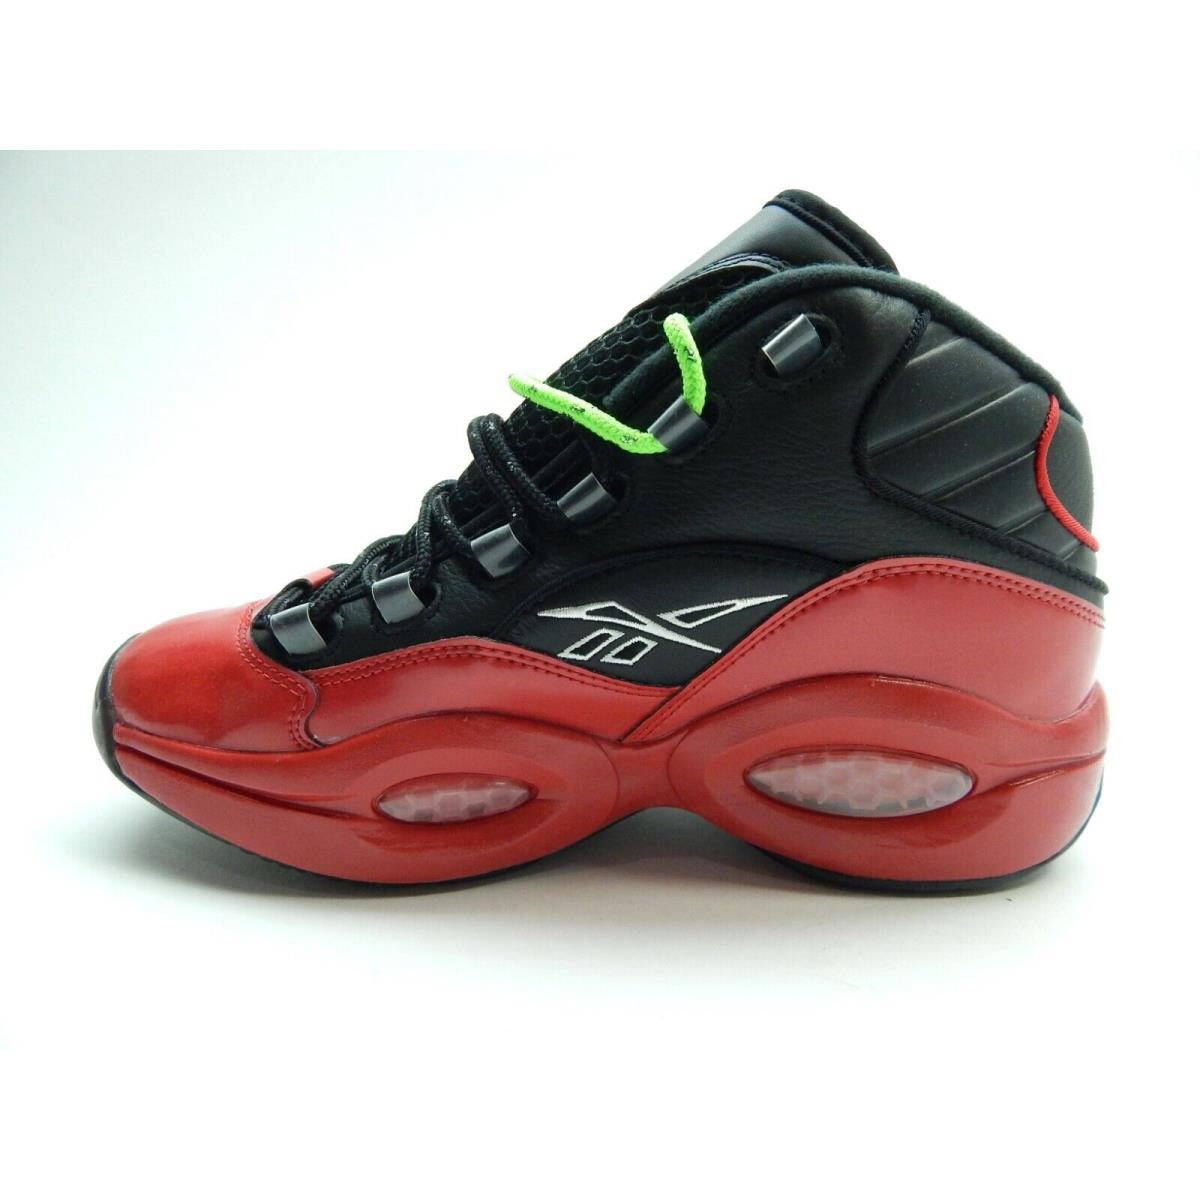 Reebok Question Mid G57551 Black Red Basketball Men Shoes